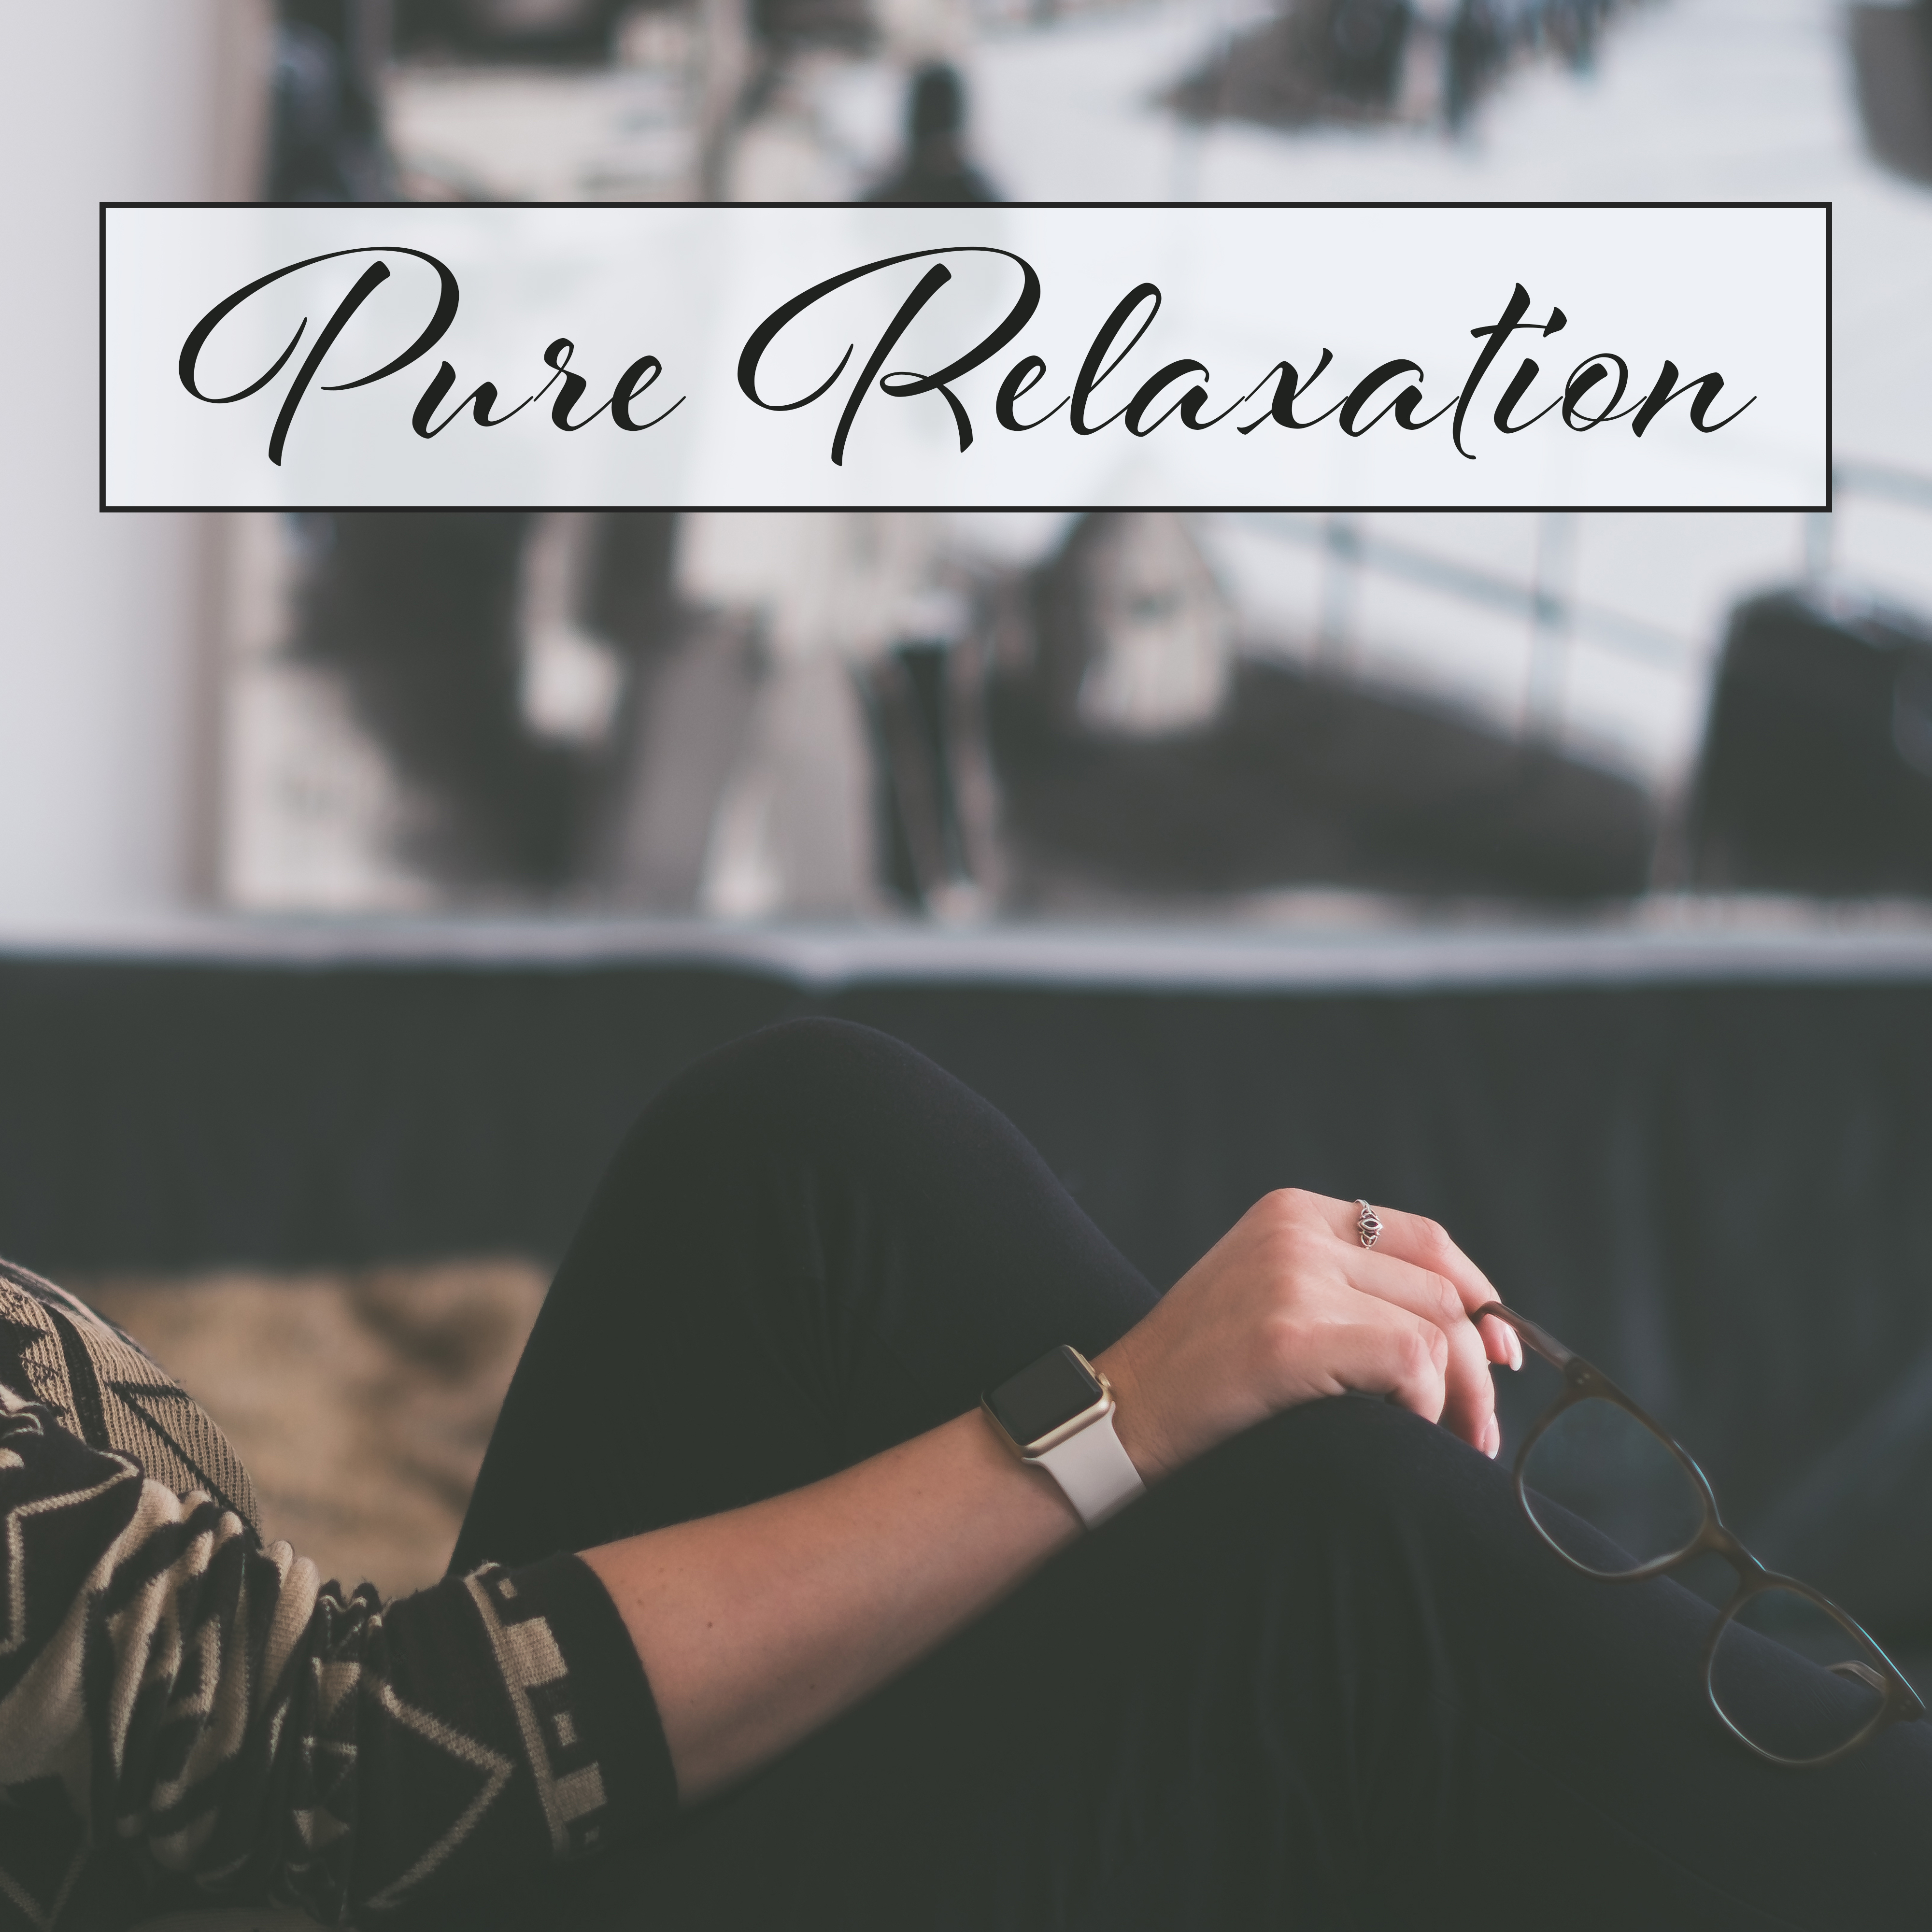 Pure Relaxation – Peaceful Music for Meditation, Zen, Training Yoga, Stress Relief, Calm Mind, Harmony & Tranquility